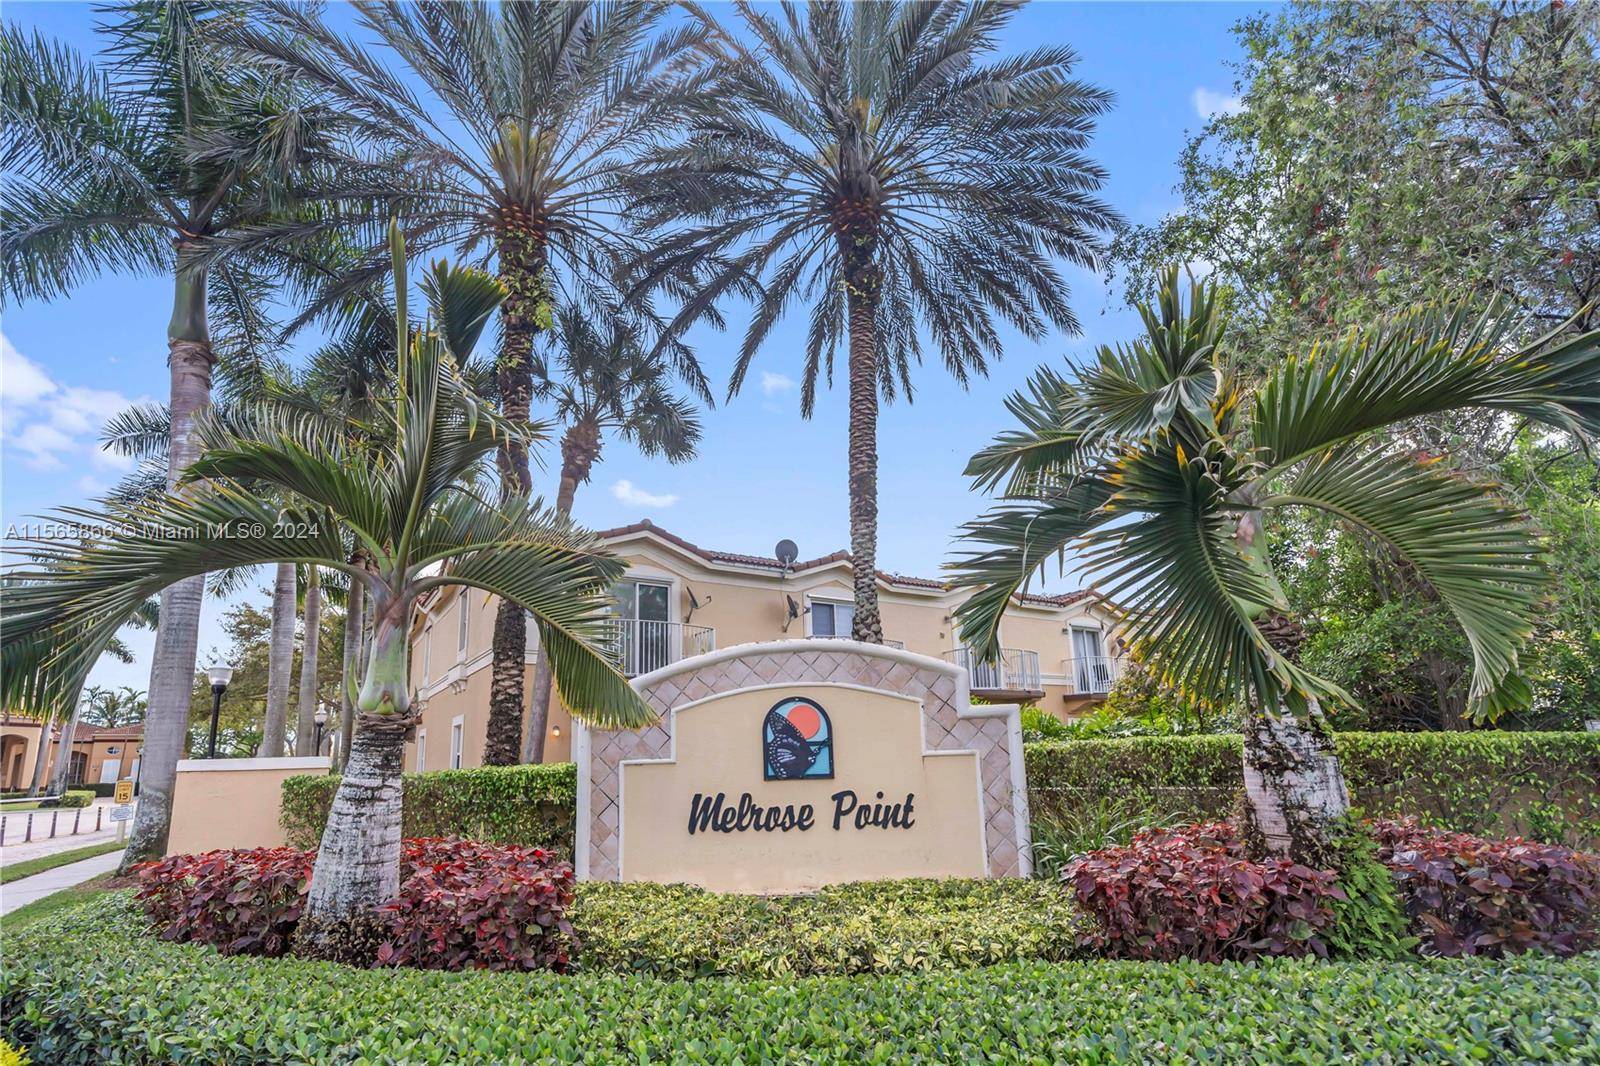 Welcome to your new home in the sought after Melrose Point Condominium within Monarch Lakes.